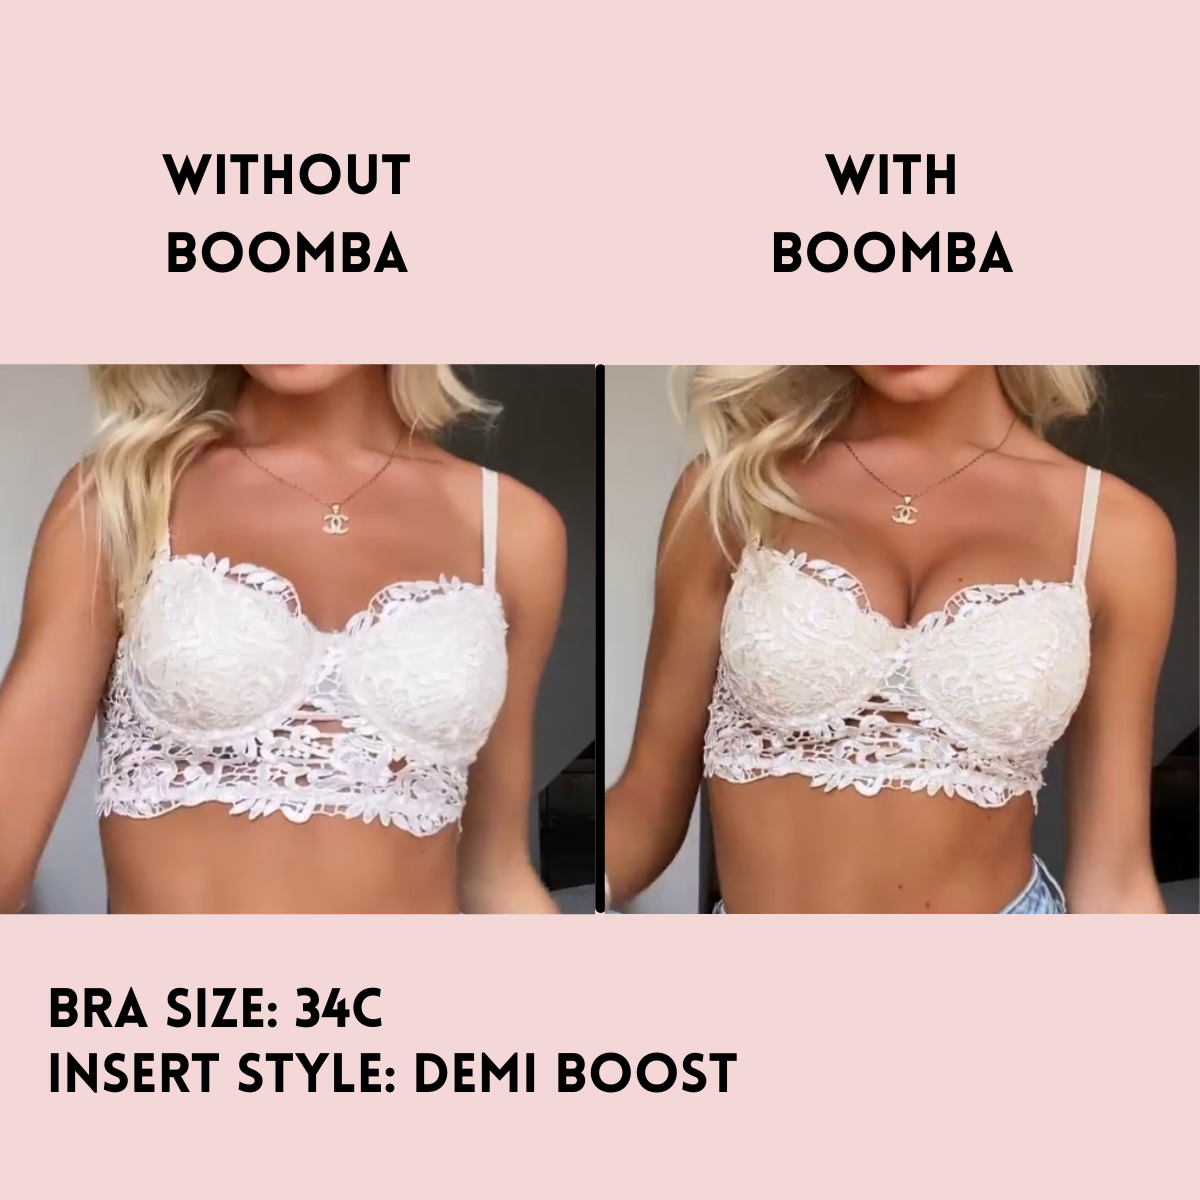 BOOMBA - What's the difference between the 3 insert